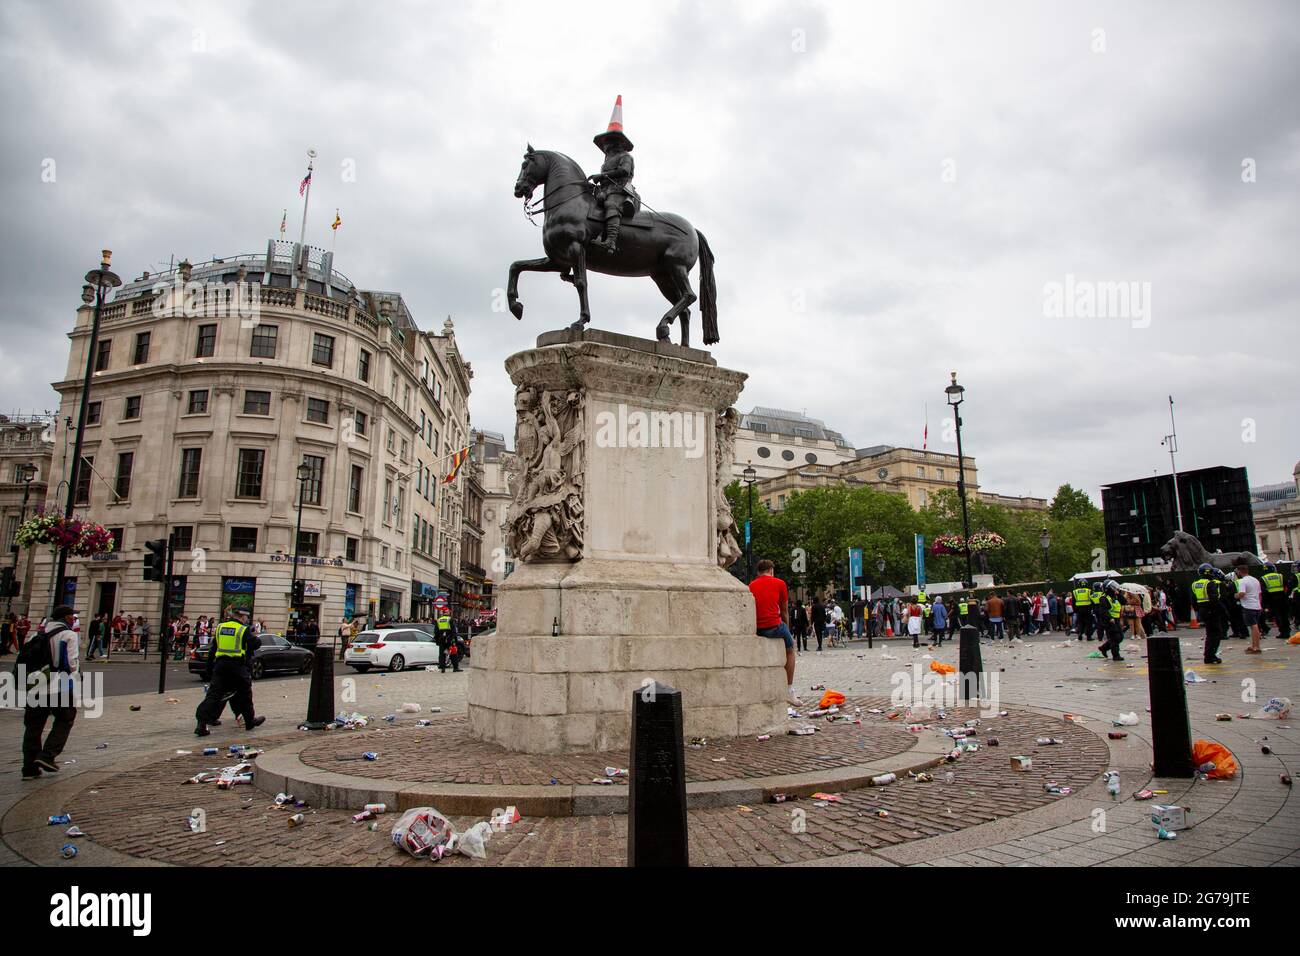 Euro 2020 Final England vs. Italy --- A statue of Charles I wearing a traffic cone. --- The earliest Renaissance-style equestrian statue in England. O Stock Photo